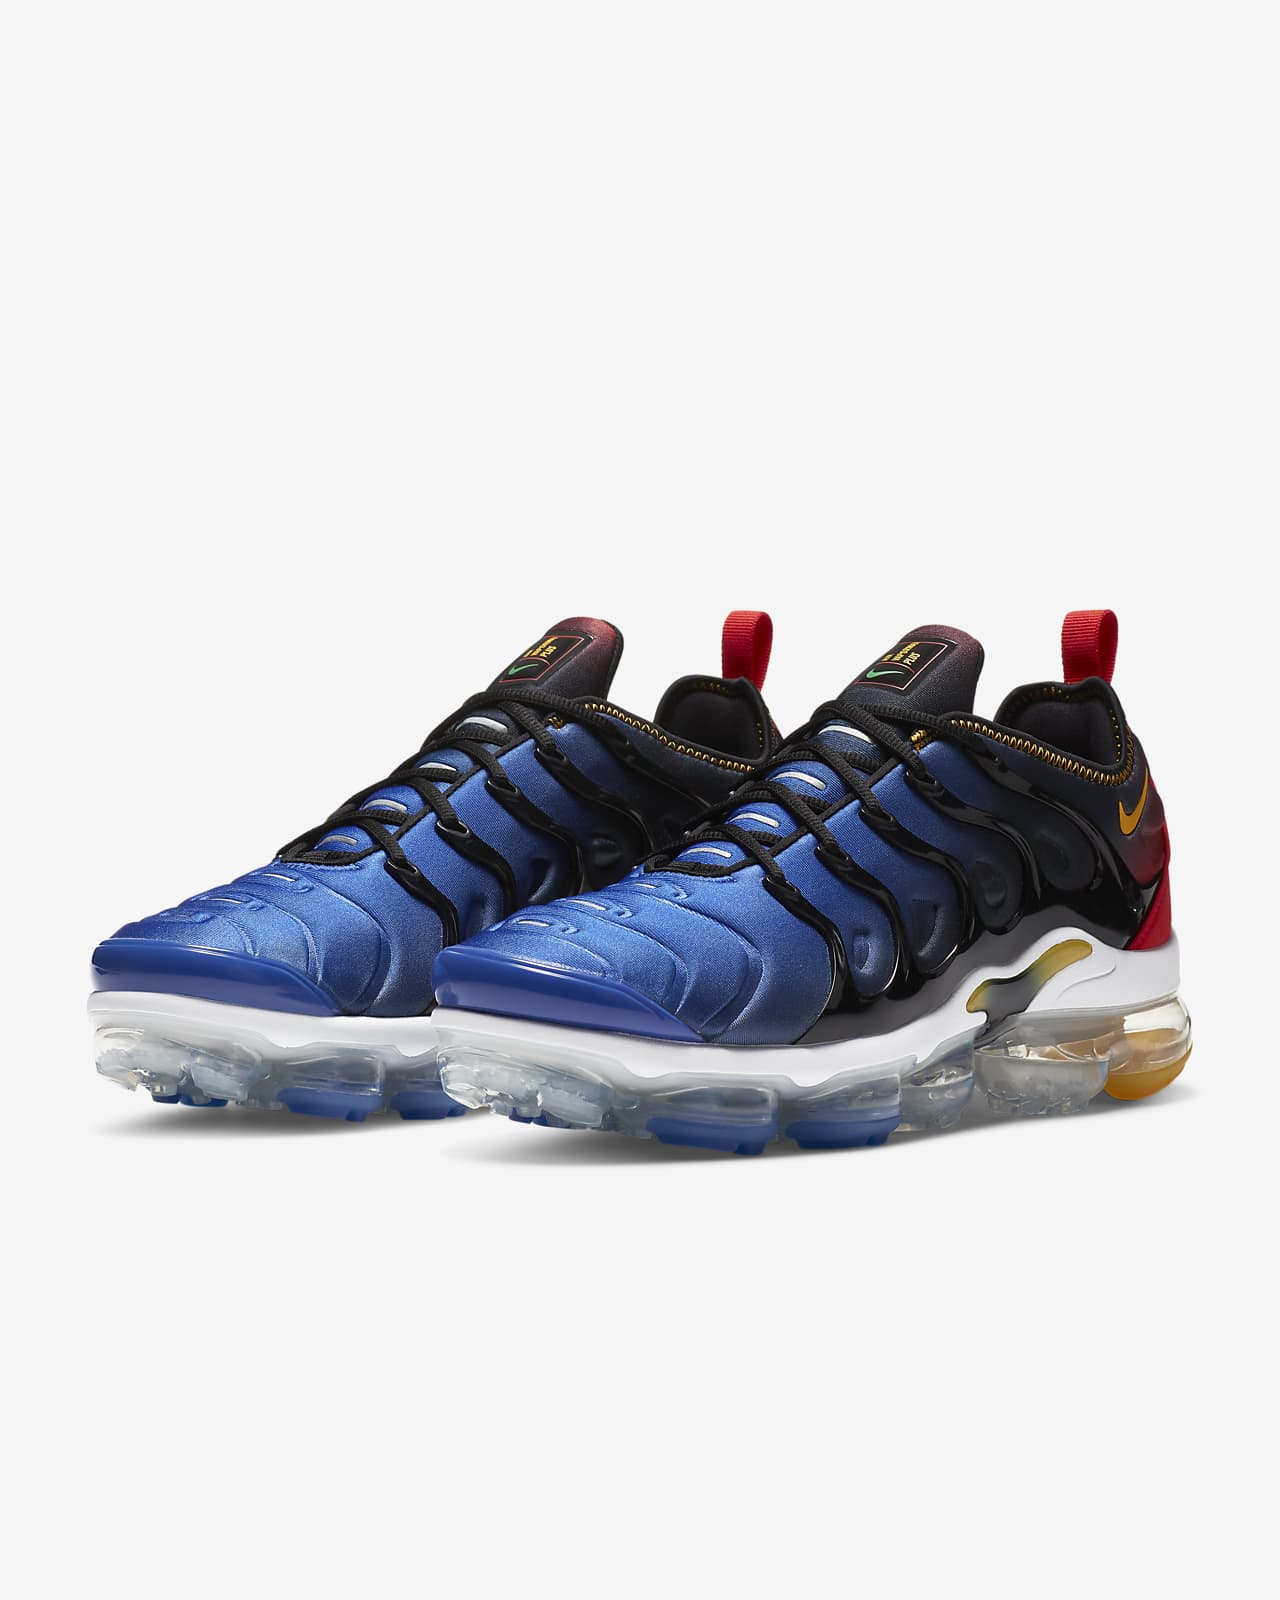 vapormax plus blue and red